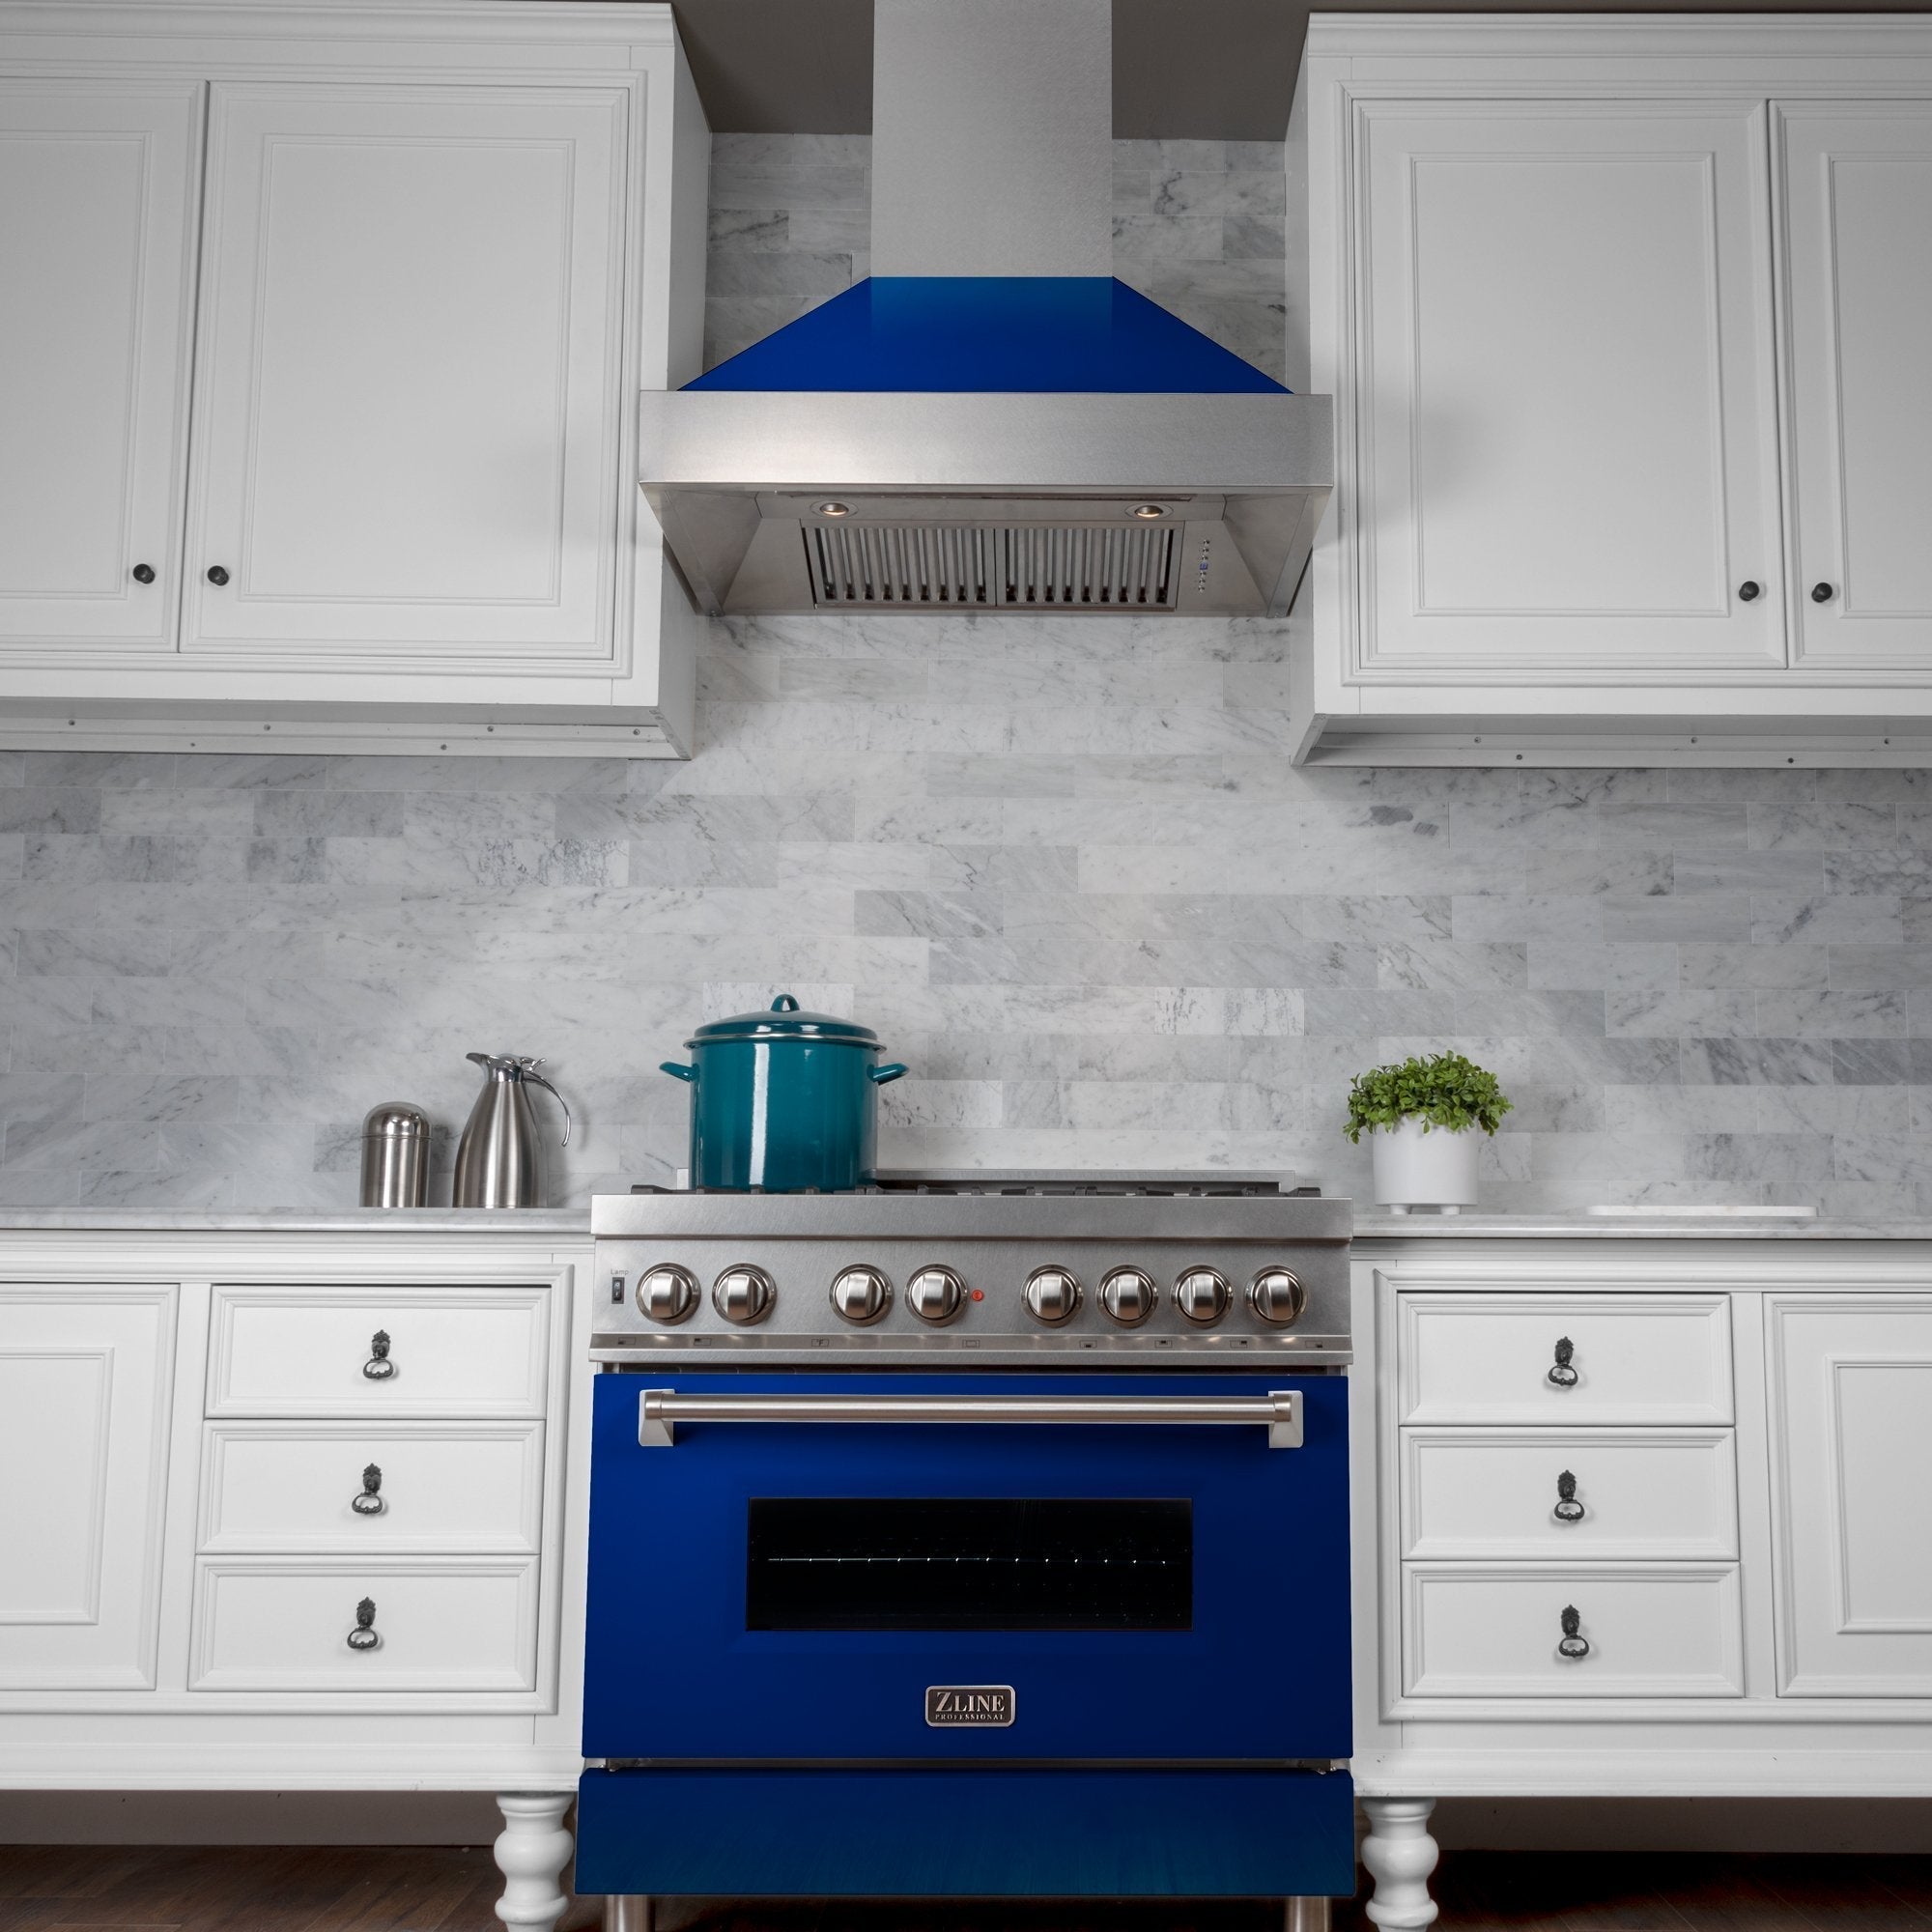 ZLINE Ducted Fingerprint Resistant Stainless Steel Range Hood with Blue Gloss Shell (8654BG) with short chimney in a kitchen with matching blue gloss range from front under.